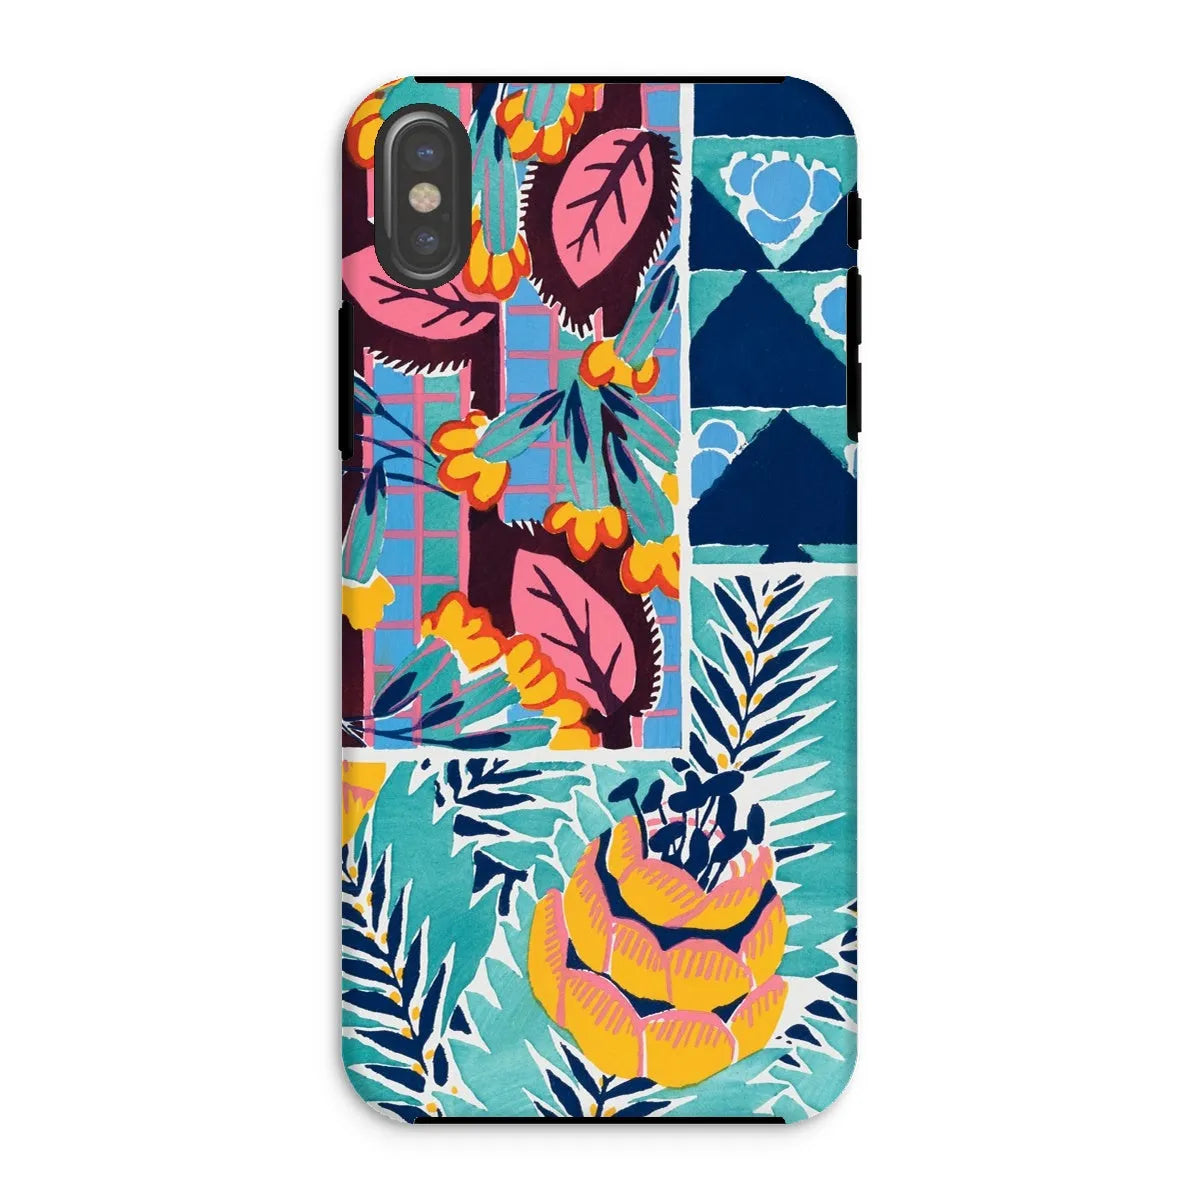 Fabric & Rugs - Pochoir Patterns Phone Case - E. A. Séguy - Iphone Xs / Matte - Mobile Phone Cases - Aesthetic Art